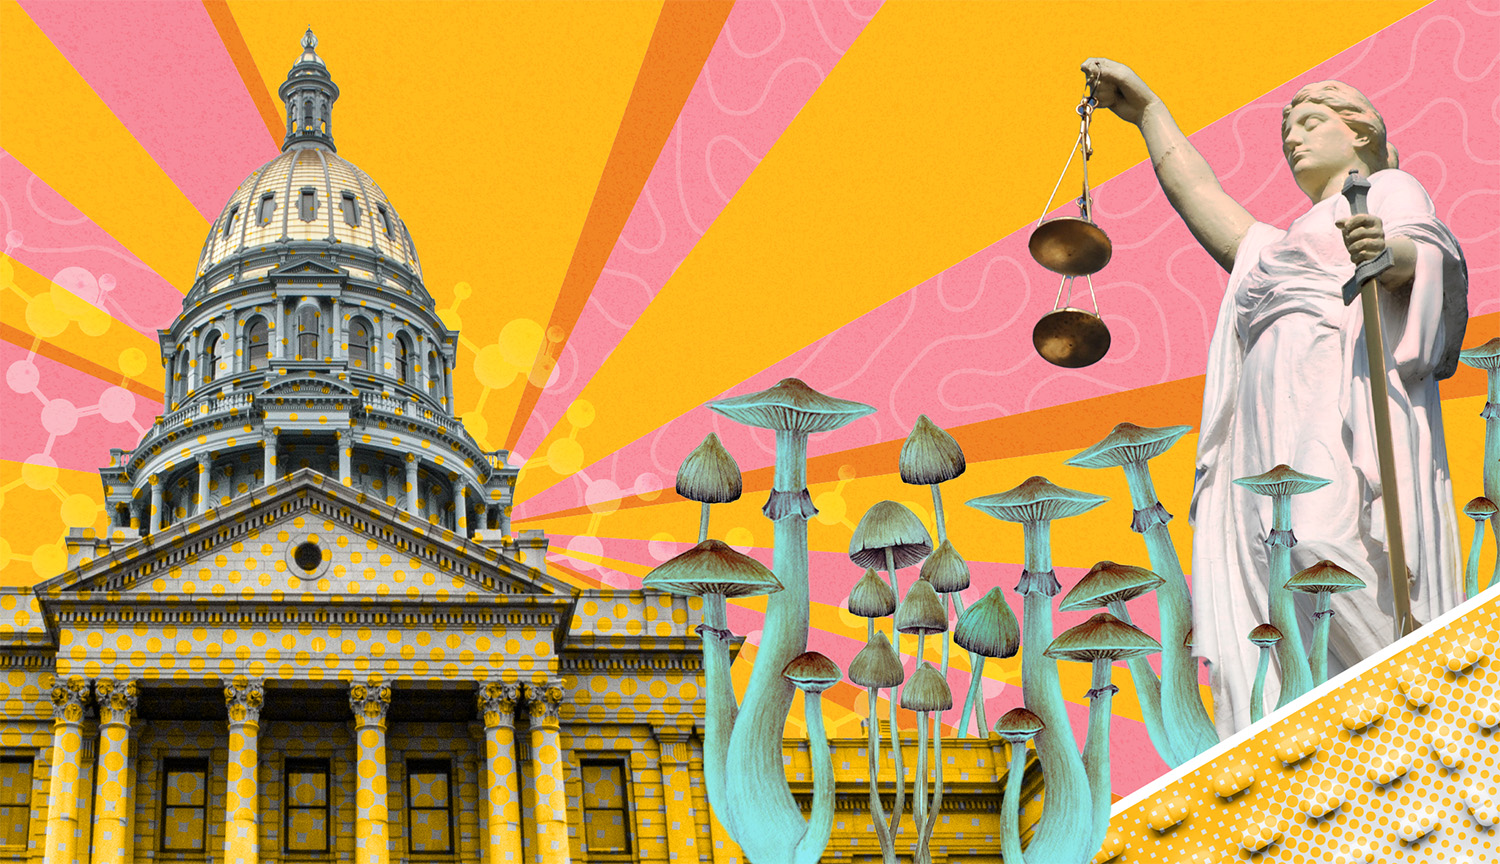 Conceptual illustration includes a state capitol building, tall mushrooms, a statue of Justice holding a scale, a pack of pills, and a bright pink, yellow and orange sky with molecules and other wavy patterns visible in it.